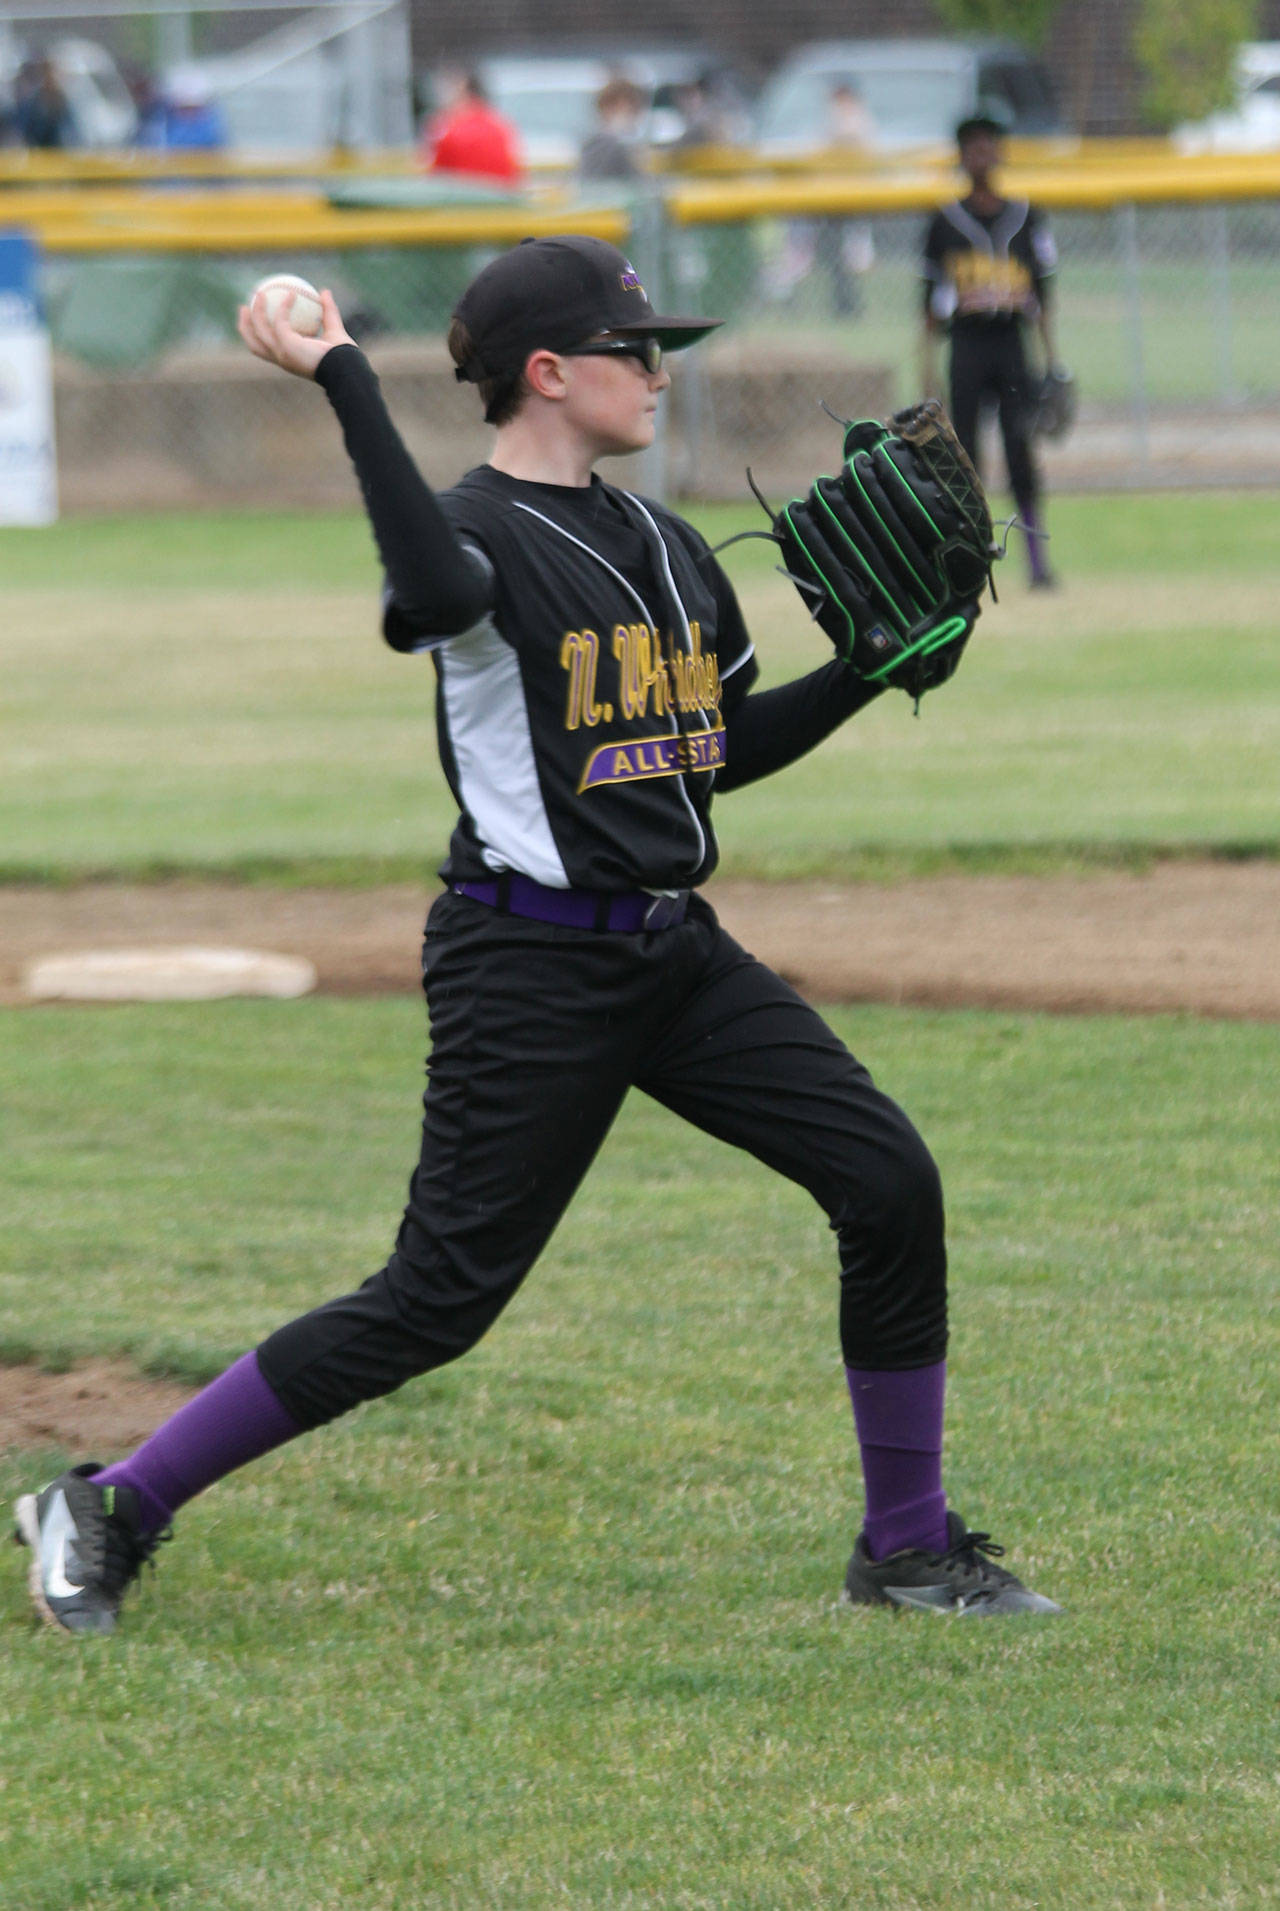 After fielding a comebacker, pitcher Coop Cooper tosses to first for an out.(Photo by Jim Waller/Whidbey News-Times)